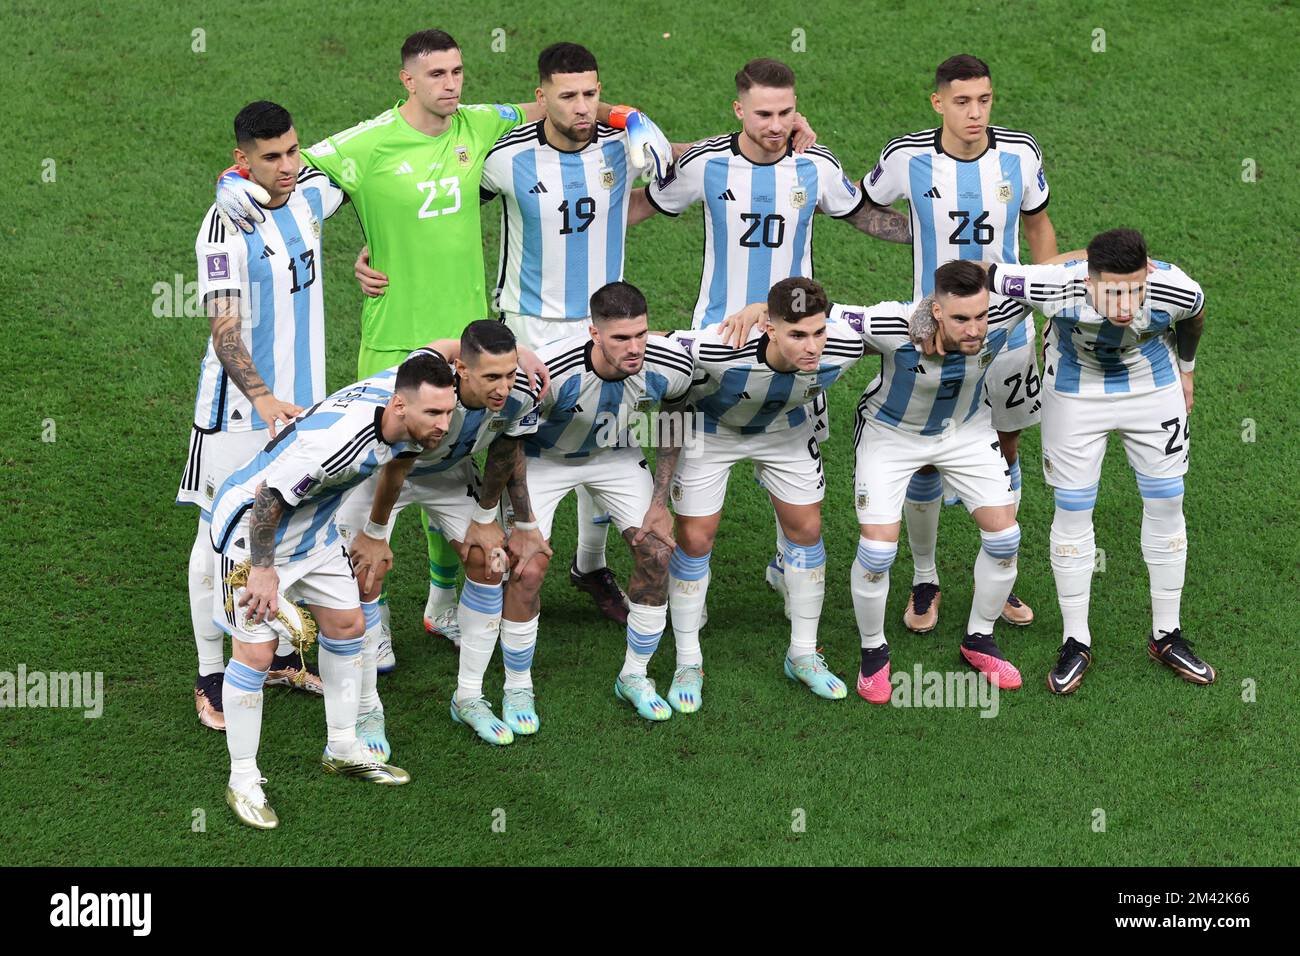 LUSAIL CITY, QATAR - DECEMBER 18: Argentina players pose for a team photo during the FIFA World Cup Qatar 2022 Final match between Argentina and France at Lusail Stadium on December 18, 2022 in Lusail City, Qatar. Photo: Igor Kralj/PIXSELL Stock Photo